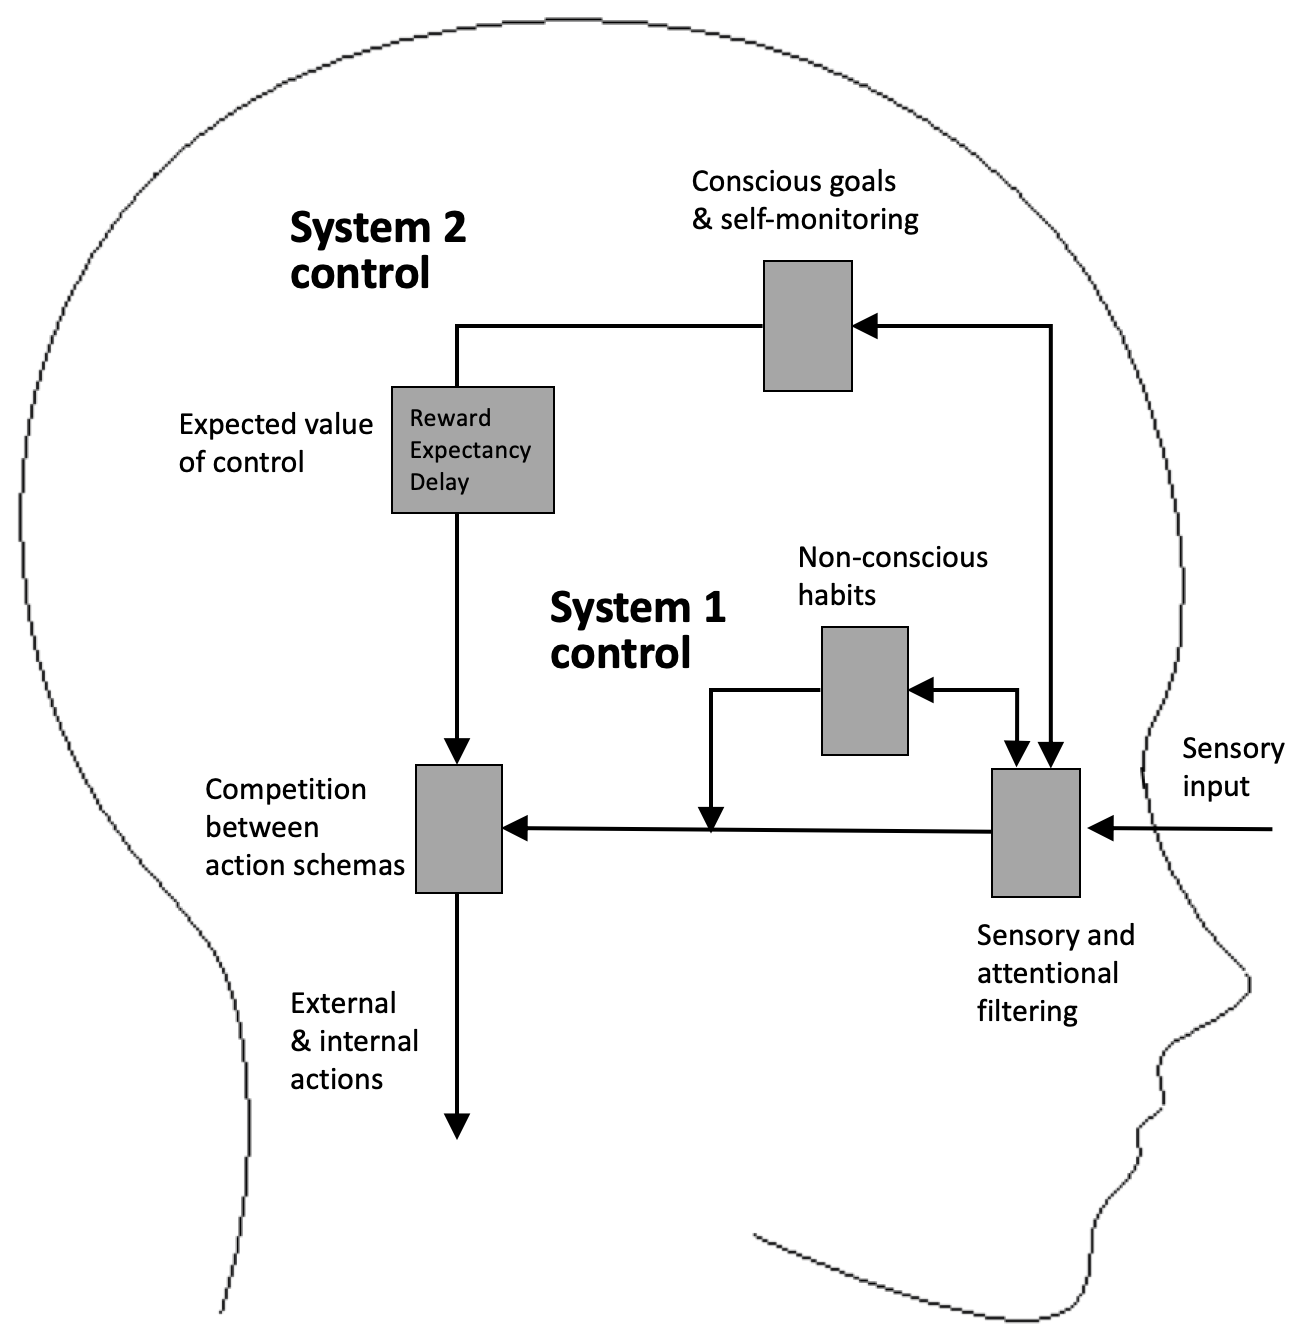 An extended dual systems model of self-regulation, developed from Shea et al. (2014) and D. A. Norman and Shallice (1986). System 1 control is rapid and non-conscious, whereas System 2 control is slower, conscious, and capacity-limited. The strength of System 2 control is mediated by the expected value of control. Both systems influence competition between action schemas, the outcome of which causes behaviour.